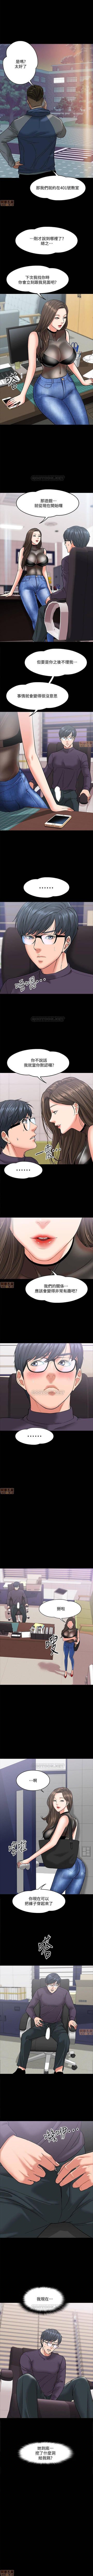 PROFESSOR, ARE YOU JUST GOING TO LOOK AT ME? | DESIRE SWAMP | 教授，你還等什麼? Ch. 5 [Chinese] Manhwa 4